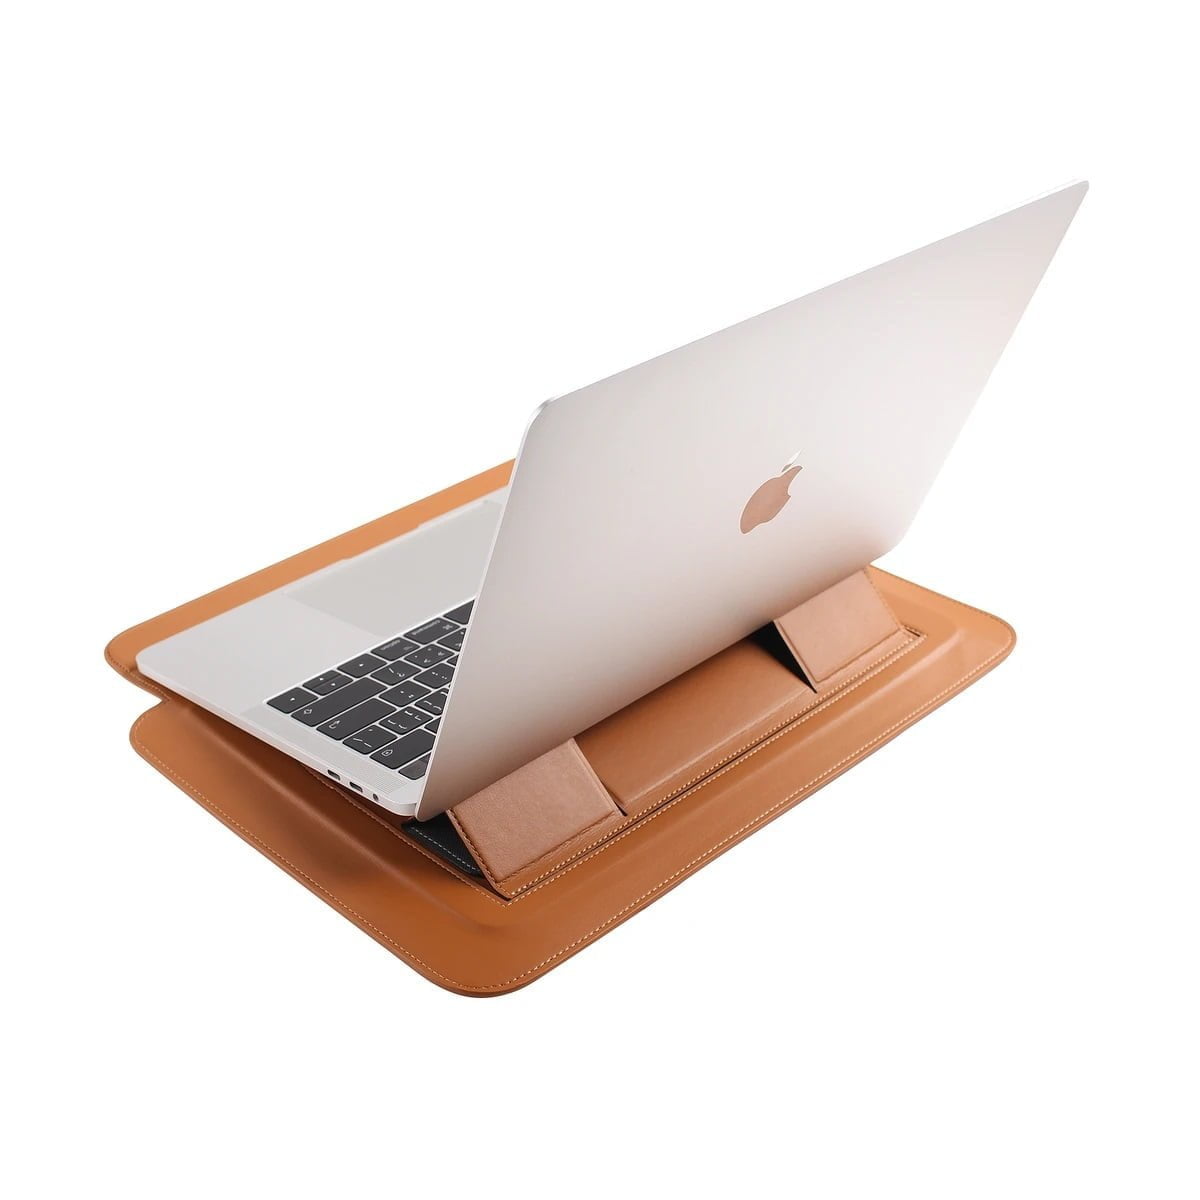 Jcp2392 Multifunction Sleeve Stand Saddlebrown &Lt;H1&Gt;Ergo Multifunction Sleeve Stand (Gray)&Lt;/H1&Gt; The Elegantly Compact Multifunction Sleeve Stand Is A Practical Carry Accessory That Allows You To Use Your Laptop In A More Ergonomic Position When You’re On The Go And Minimize Neck Strain. Featuring A Built-In Stand That Props Up Your Laptop To A 15° Or 30° Position, Magnetic Closures And Made From A Durable Pu Material, The Multifunction Sleeve Stand Is Versatile Travel Accessory. &Lt;Ul&Gt; &Lt;Li&Gt;Ergonomic Riser Stand Holds Laptop At 15° Or 30°&Lt;/Li&Gt; &Lt;Li&Gt;Magnetic Closure/Stand For Quick And Easy Setup&Lt;/Li&Gt; &Lt;Li&Gt;Increases Cooling Airflow Around Laptop&Lt;/Li&Gt; &Lt;Li&Gt;Durable 3Mm Pu Material&Lt;/Li&Gt; &Lt;/Ul&Gt; Ergo Multifunction Sleeve Stand (Gray) - Jcp2393